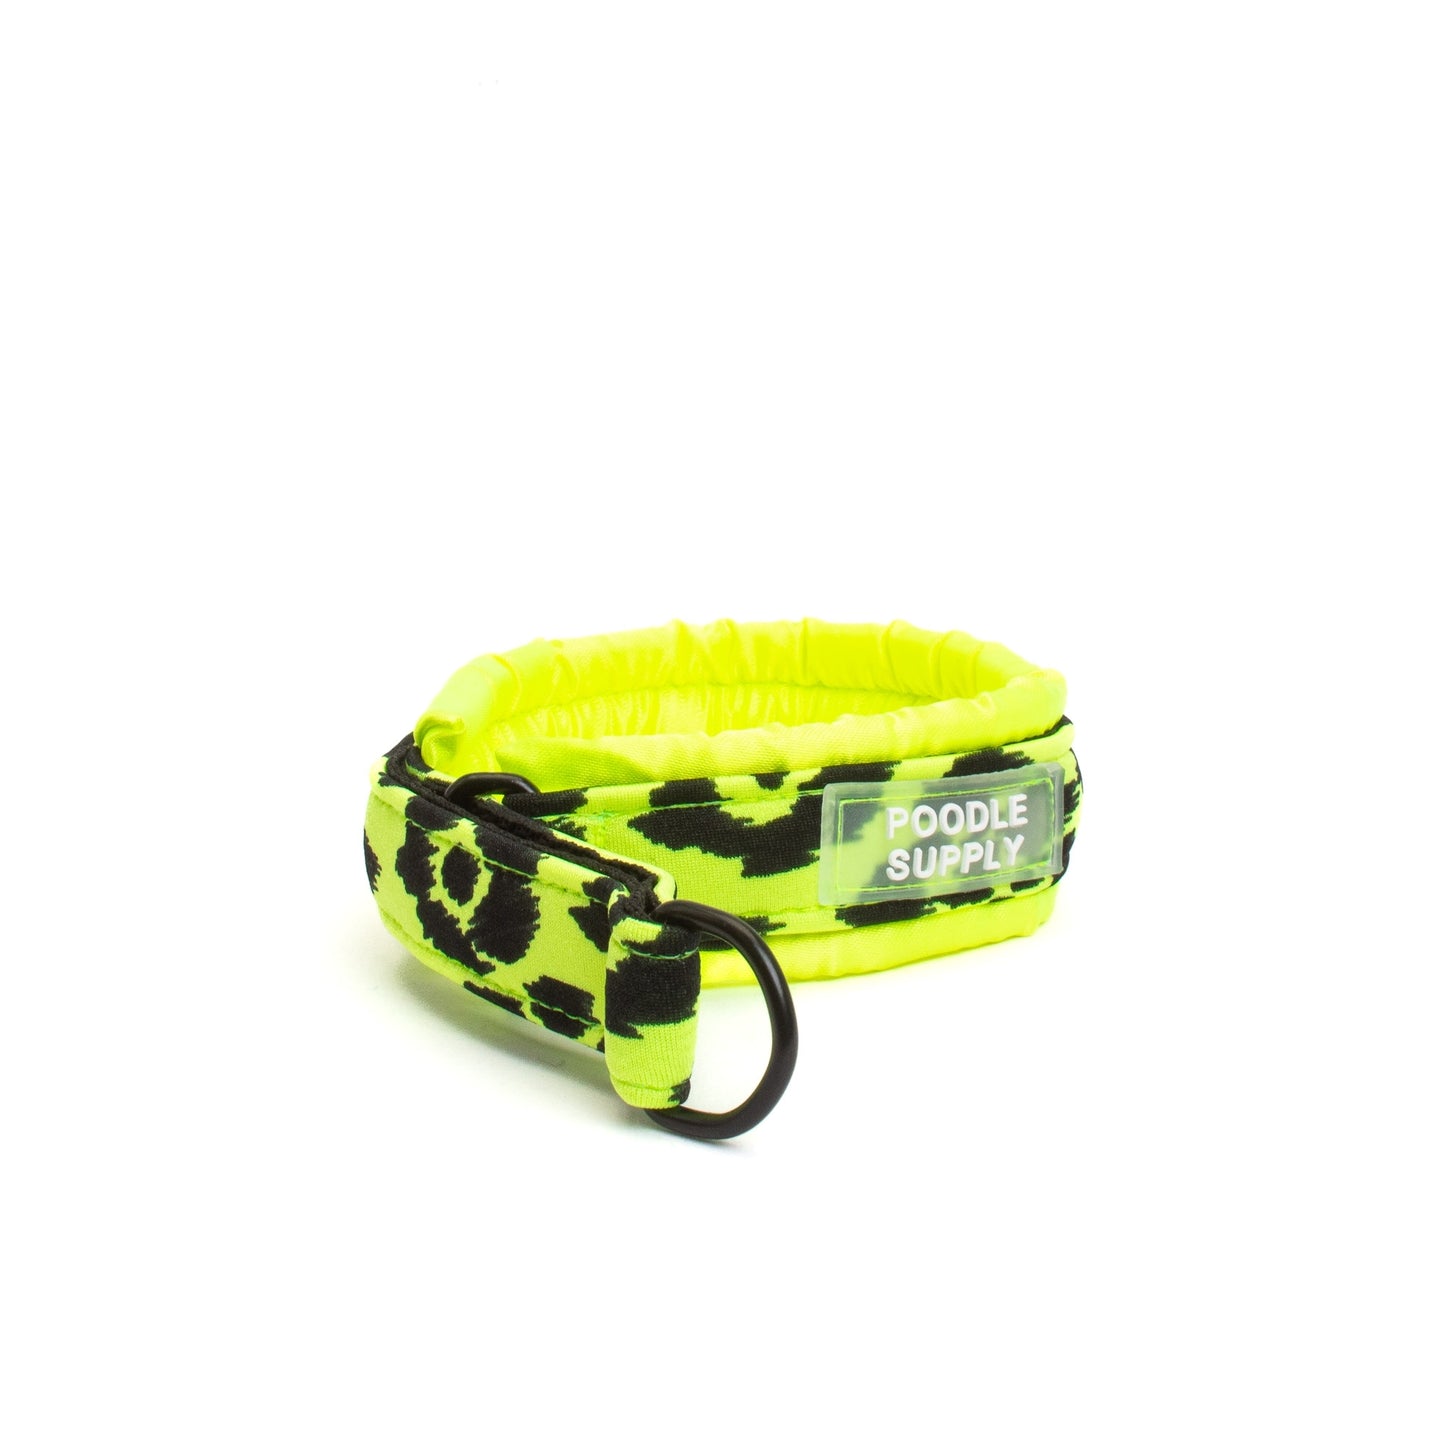 Small / Medium / Large Martingale Collar Poodle Supply  Fluorescent Yellow